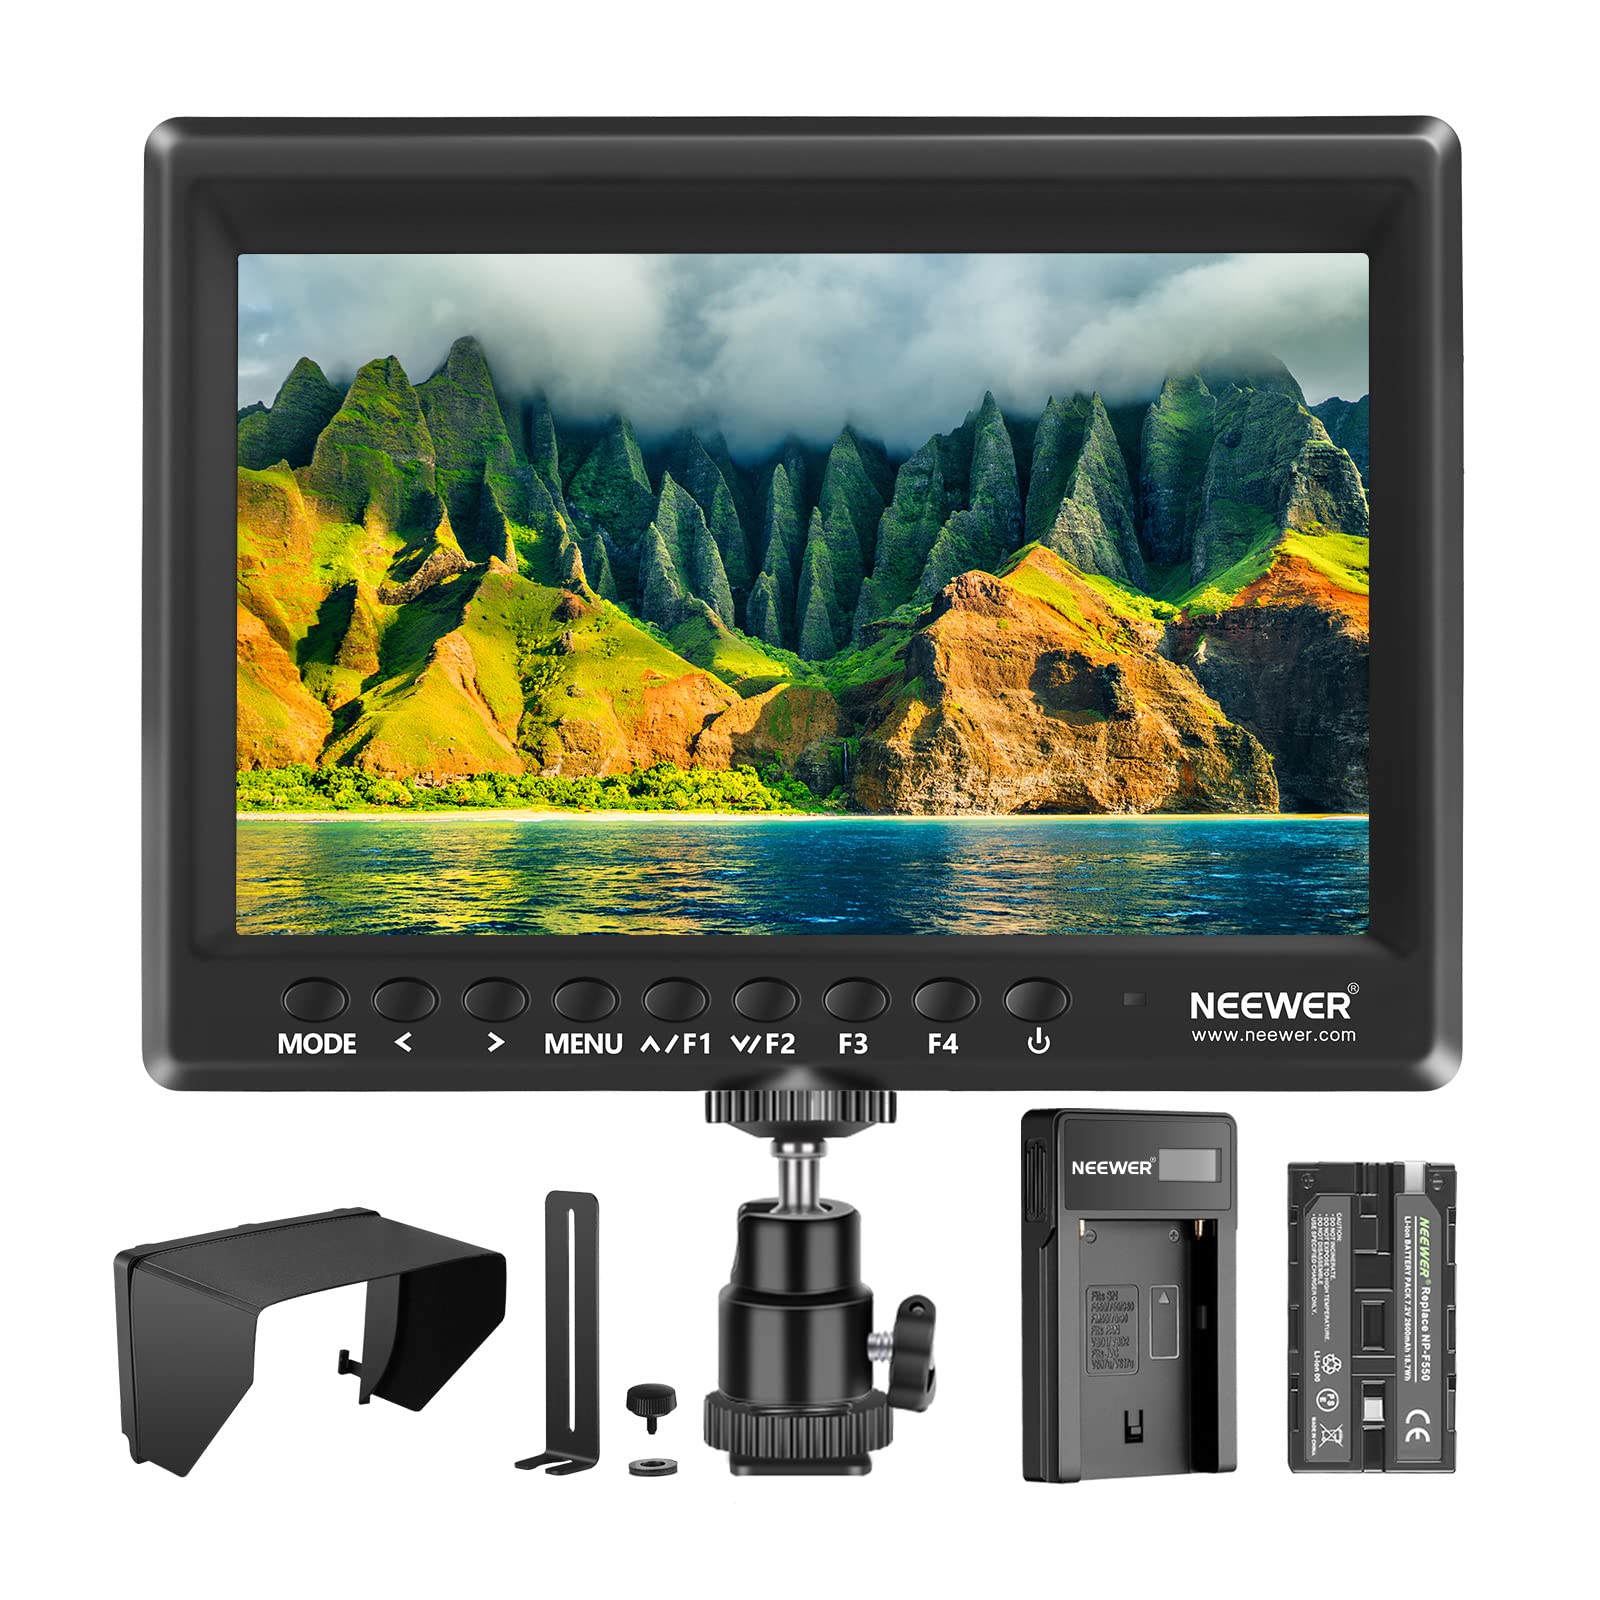 Neewer Film Movie Video Making System Kit with F100 7-inch 1280x800 IPS Screen Field Monitor (Support 4k Input) and Cool Ballhead Arm (Kit I)